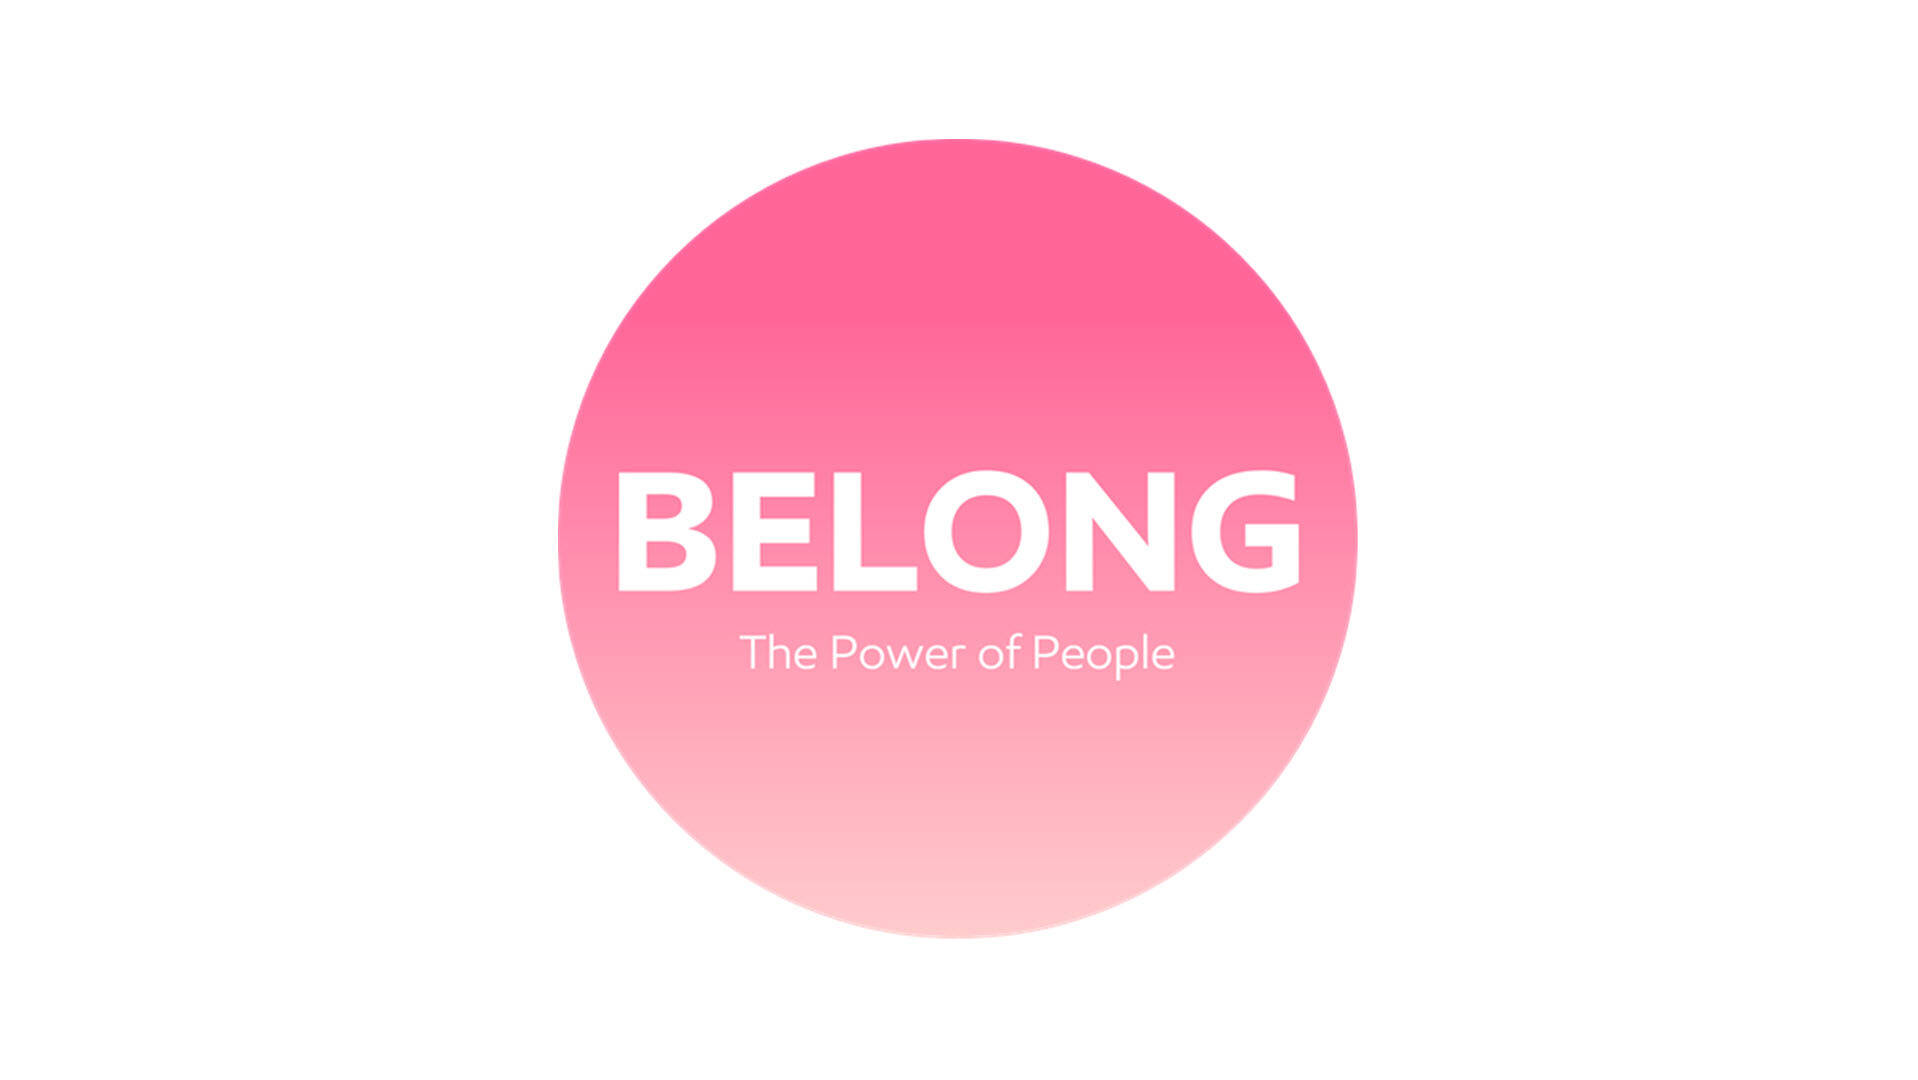 Belong is a way to nurture the feeling of belonging and thus share common interests and aspirations. The objective is to allow members to feel part of a single community that nurtures creativity while leveraging individual qualities, awakening empathy and generating positive results for all.